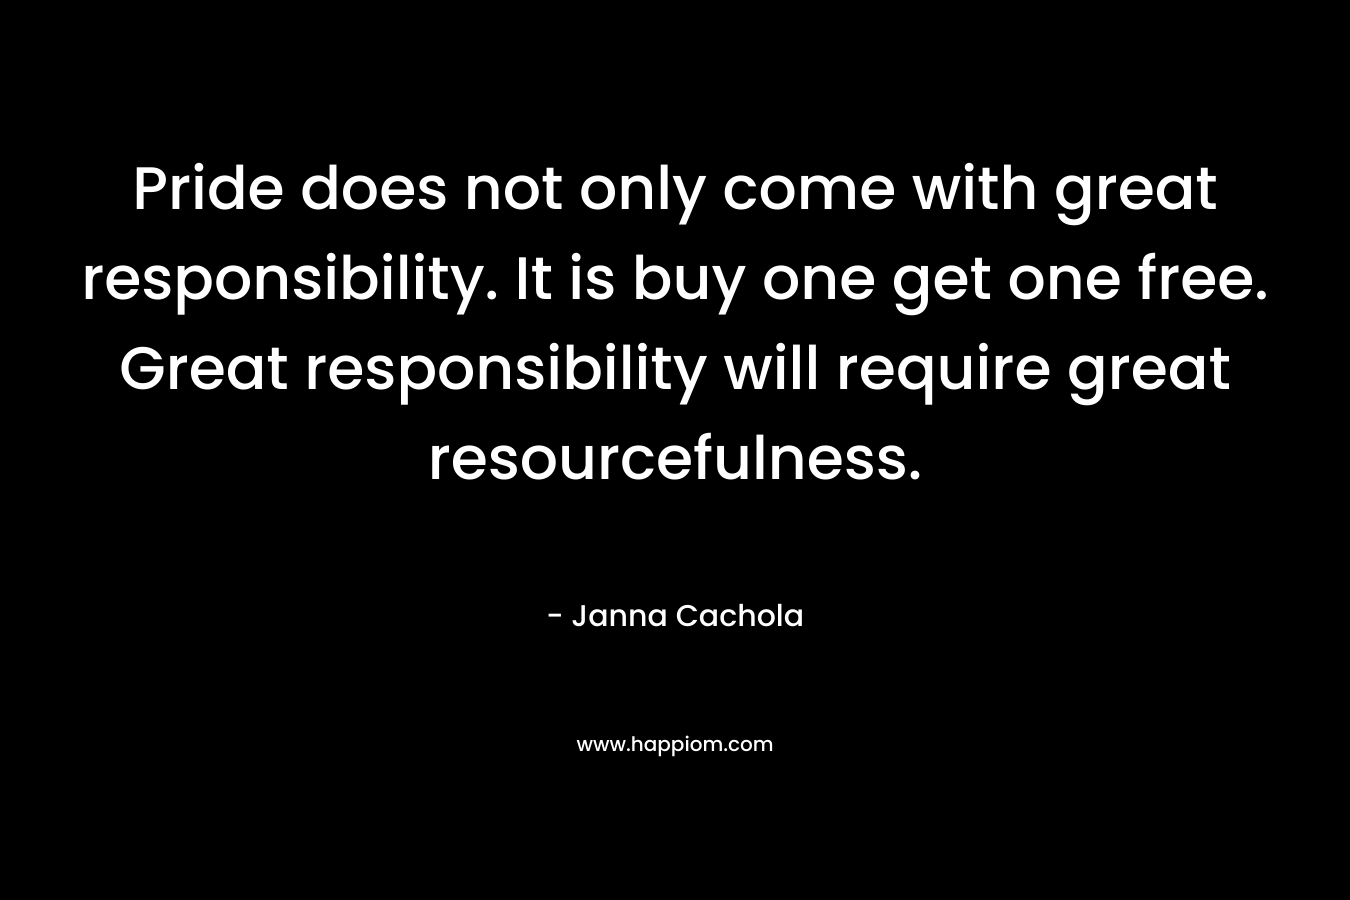 Pride does not only come with great responsibility. It is buy one get one free. Great responsibility will require great resourcefulness.